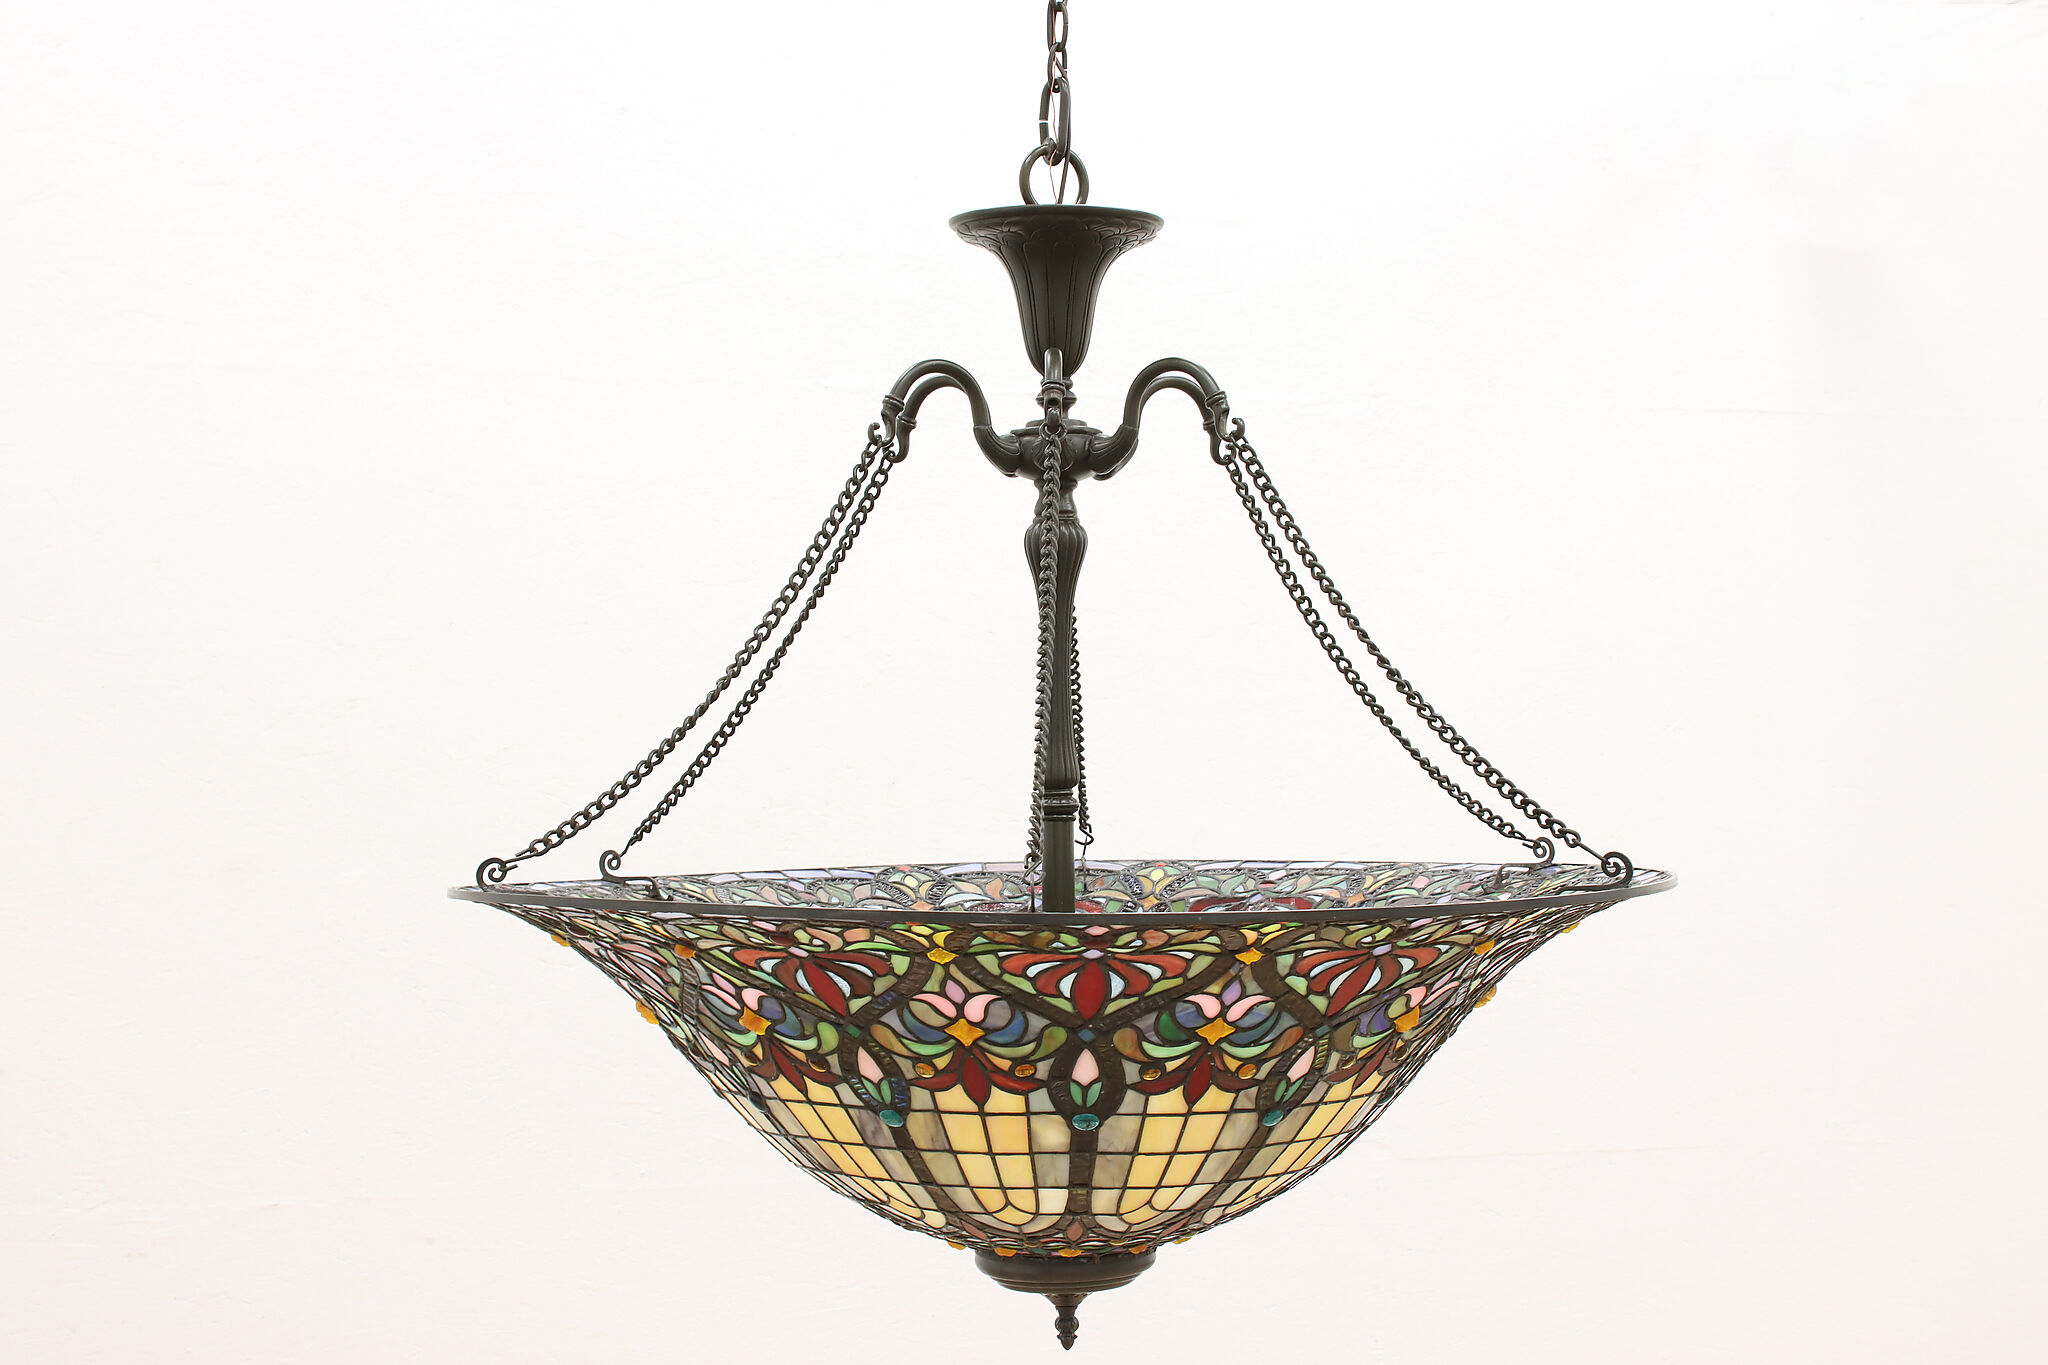 Dome Design Stained Glass 37 Vintage Ceiling Light Fixture with Jewels